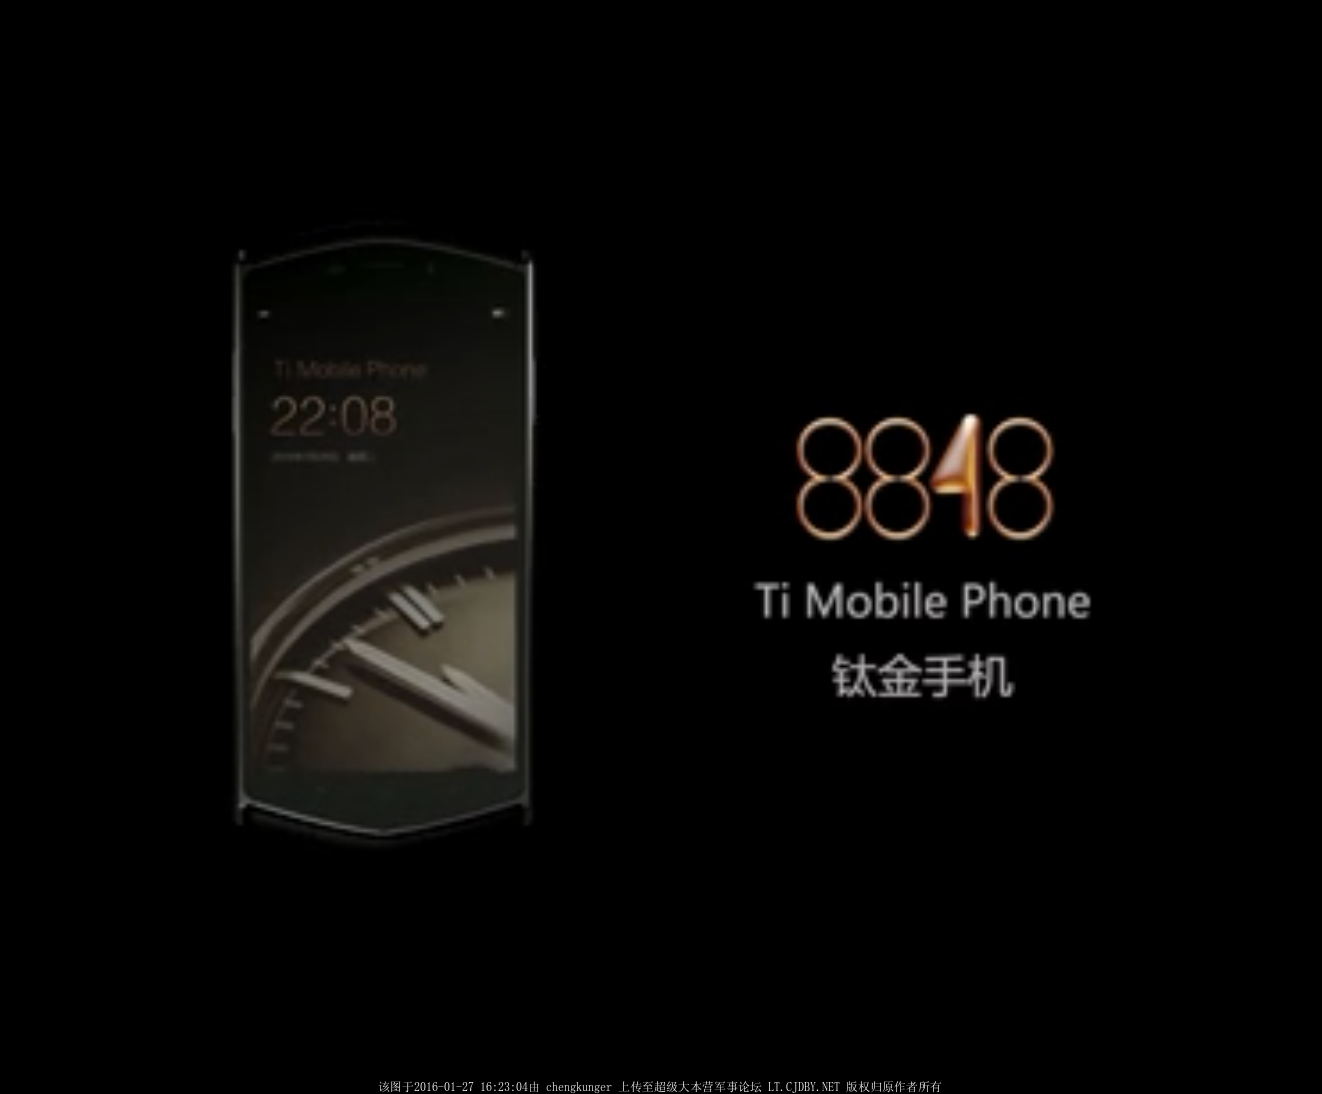 8848 Titanium M6 5G Luxury Phone Officially Launched - Gizchina.com